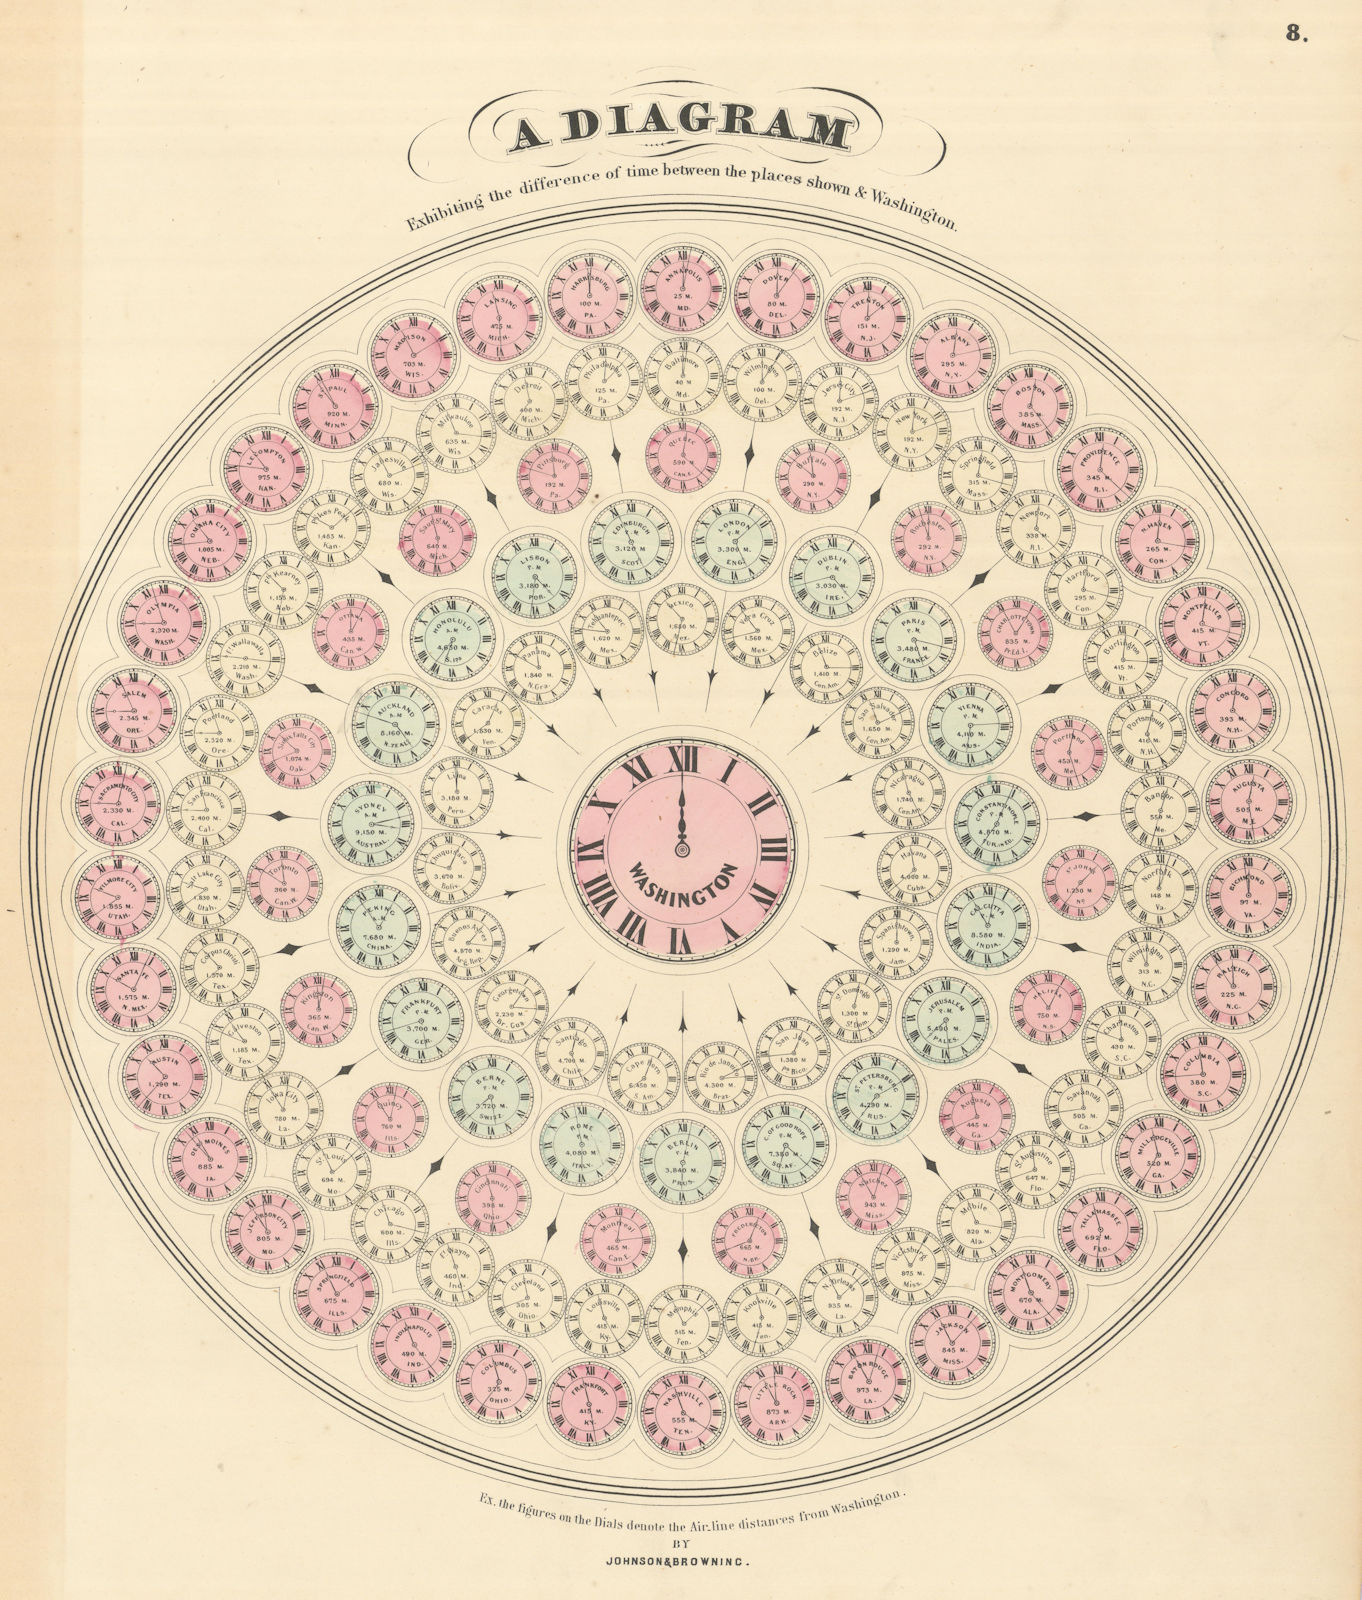 Associate Product Time differences & zones from Washington DC by Johnson & Browning. Pre UT 1861